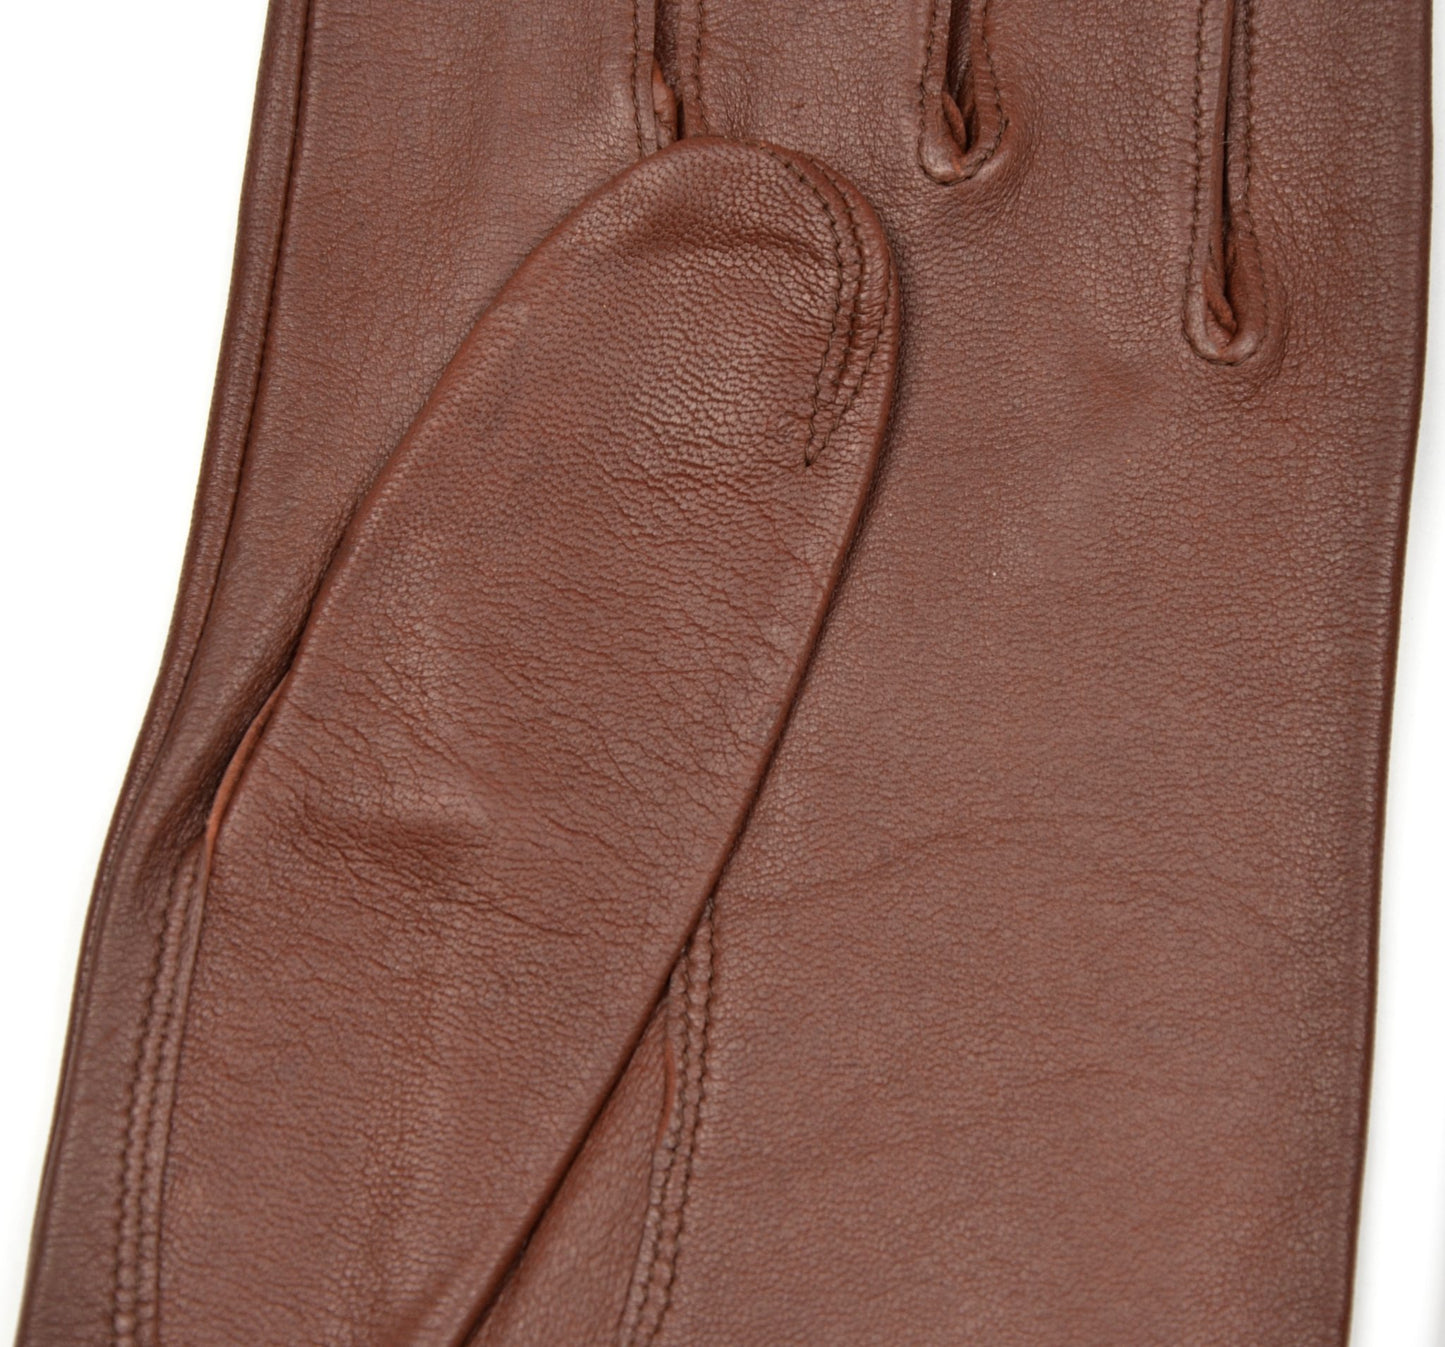 Unlined Calfskin Leather Dress Gloves Size 8 1/2 - Brown